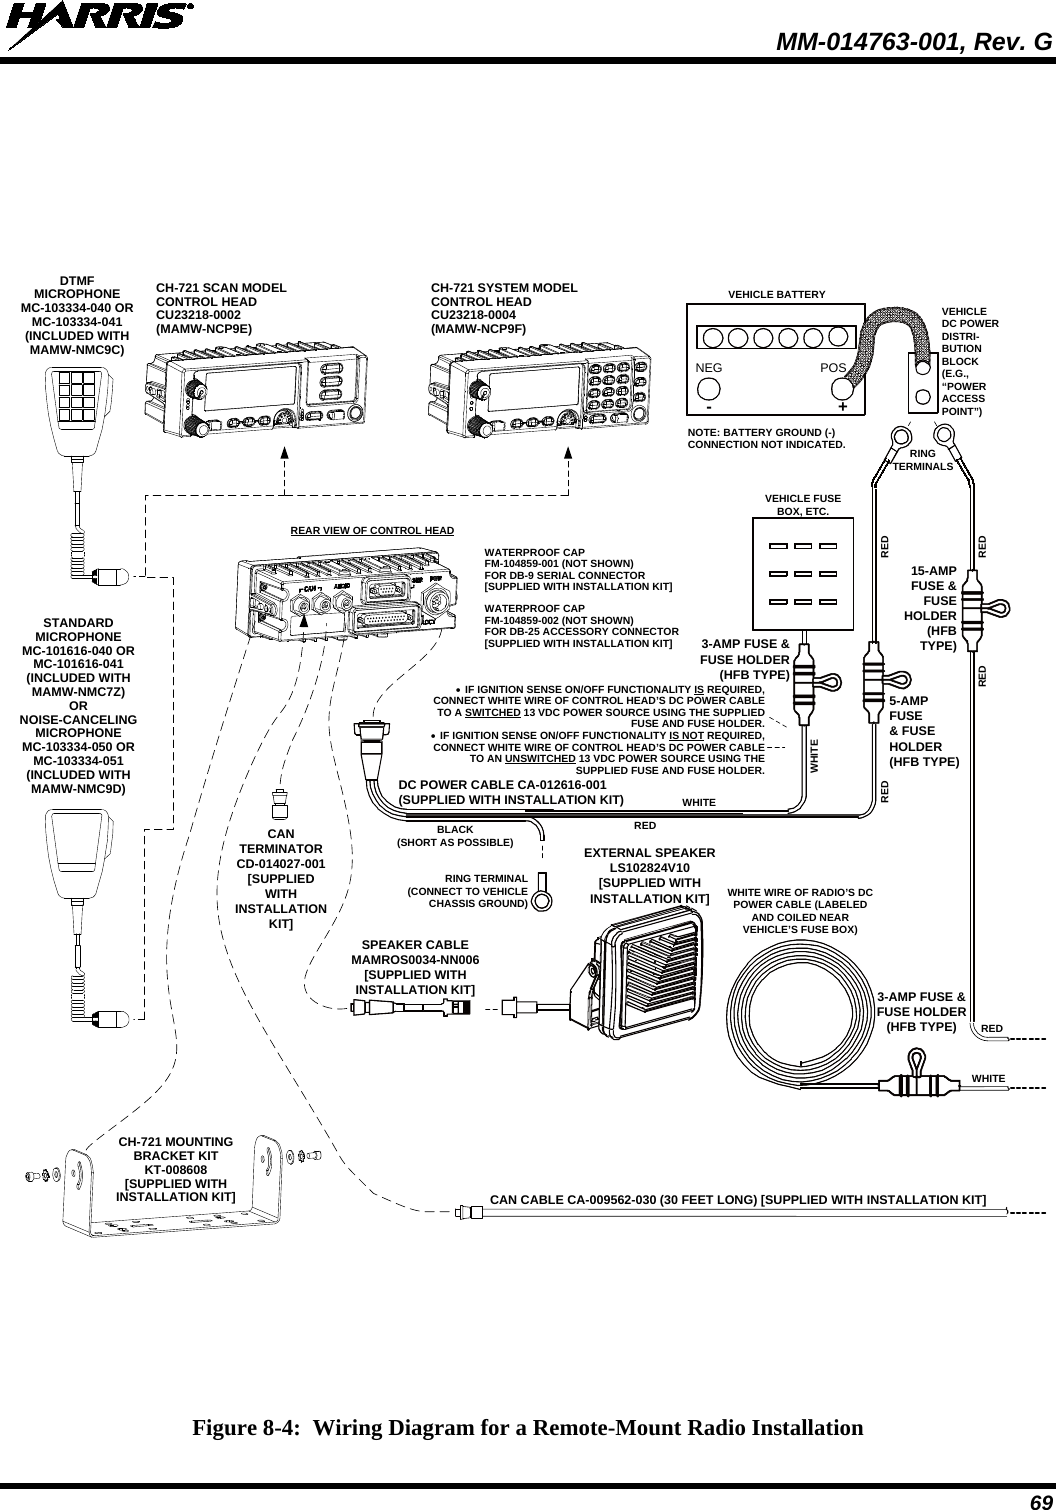  MM-014763-001, Rev. G 69  Figure 8-4:  Wiring Diagram for a Remote-Mount Radio Installation CH-721 SCAN MODELCONTROL HEADCU23218-0002(MAMW-NCP9E)CH-721 SYSTEM MODELCONTROL HEADCU23218-0004(MAMW-NCP9F)DTMFMICROPHONEMC-103334-040 ORMC-103334-041(INCLUDED WITHMAMW-NMC9C)STANDARD MICROPHONEMC-101616-040 ORMC-101616-041(INCLUDED WITHMAMW-NMC7Z)ORNOISE-CANCELINGMICROPHONEMC-103334-050 ORMC-103334-051(INCLUDED WITHMAMW-NMC9D)CH-721 MOUNTING BRACKET KITKT-008608[SUPPLIED WITH INSTALLATION KIT]•  IF IGNITION SENSE ON/OFF FUNCTIONALITY IS REQUIRED, CONNECT WHITE WIRE OF CONTROL HEAD’S DC POWER CABLE TO A SWITCHED 13 VDC POWER SOURCE USING THE SUPPLIED FUSE AND FUSE HOLDER.•  IF IGNITION SENSE ON/OFF FUNCTIONALITY IS NOT REQUIRED, CONNECT WHITE WIRE OF CONTROL HEAD’S DC POWER CABLE TO AN UNSWITCHED 13 VDC POWER SOURCE USING THE SUPPLIED FUSE AND FUSE HOLDER.WATERPROOF CAPFM-104859-001 (NOT SHOWN)FOR DB-9 SERIAL CONNECTOR[SUPPLIED WITH INSTALLATION KIT]WATERPROOF CAPFM-104859-002 (NOT SHOWN)FOR DB-25 ACCESSORY CONNECTOR[SUPPLIED WITH INSTALLATION KIT]REAR VIEW OF CONTROL HEADNEG POS3-AMP FUSE &amp; FUSE HOLDER (HFB TYPE) REDRED RED5-AMPFUSE&amp; FUSE HOLDER (HFB TYPE)3-AMP FUSE &amp; FUSE HOLDER(HFB TYPE)15-AMPFUSE &amp; FUSE HOLDER(HFB TYPE)REDWHITEREDRINGTERMINALSVEHICLEDC POWER DISTRI-BUTION BLOCK(E.G., “POWER ACCESS POINT”)VEHICLE BATTERY+-NOTE: BATTERY GROUND (-) CONNECTION NOT INDICATED.CAN TERMINATORCD-014027-001[SUPPLIED WITH INSTALLATION KIT]REDWHITEBLACK(SHORT AS POSSIBLE)RING TERMINAL (CONNECT TO VEHICLE CHASSIS GROUND)CAN CABLE CA-009562-030 (30 FEET LONG) [SUPPLIED WITH INSTALLATION KIT]SPEAKER CABLEMAMROS0034-NN006[SUPPLIED WITHINSTALLATION KIT]EXTERNAL SPEAKERLS102824V10[SUPPLIED WITHINSTALLATION KIT] WHITE WIRE OF RADIO’S DC POWER CABLE (LABELED AND COILED NEAR VEHICLE’S FUSE BOX)DC POWER CABLE CA-012616-001(SUPPLIED WITH INSTALLATION KIT)VEHICLE FUSE BOX, ETC.WHITE